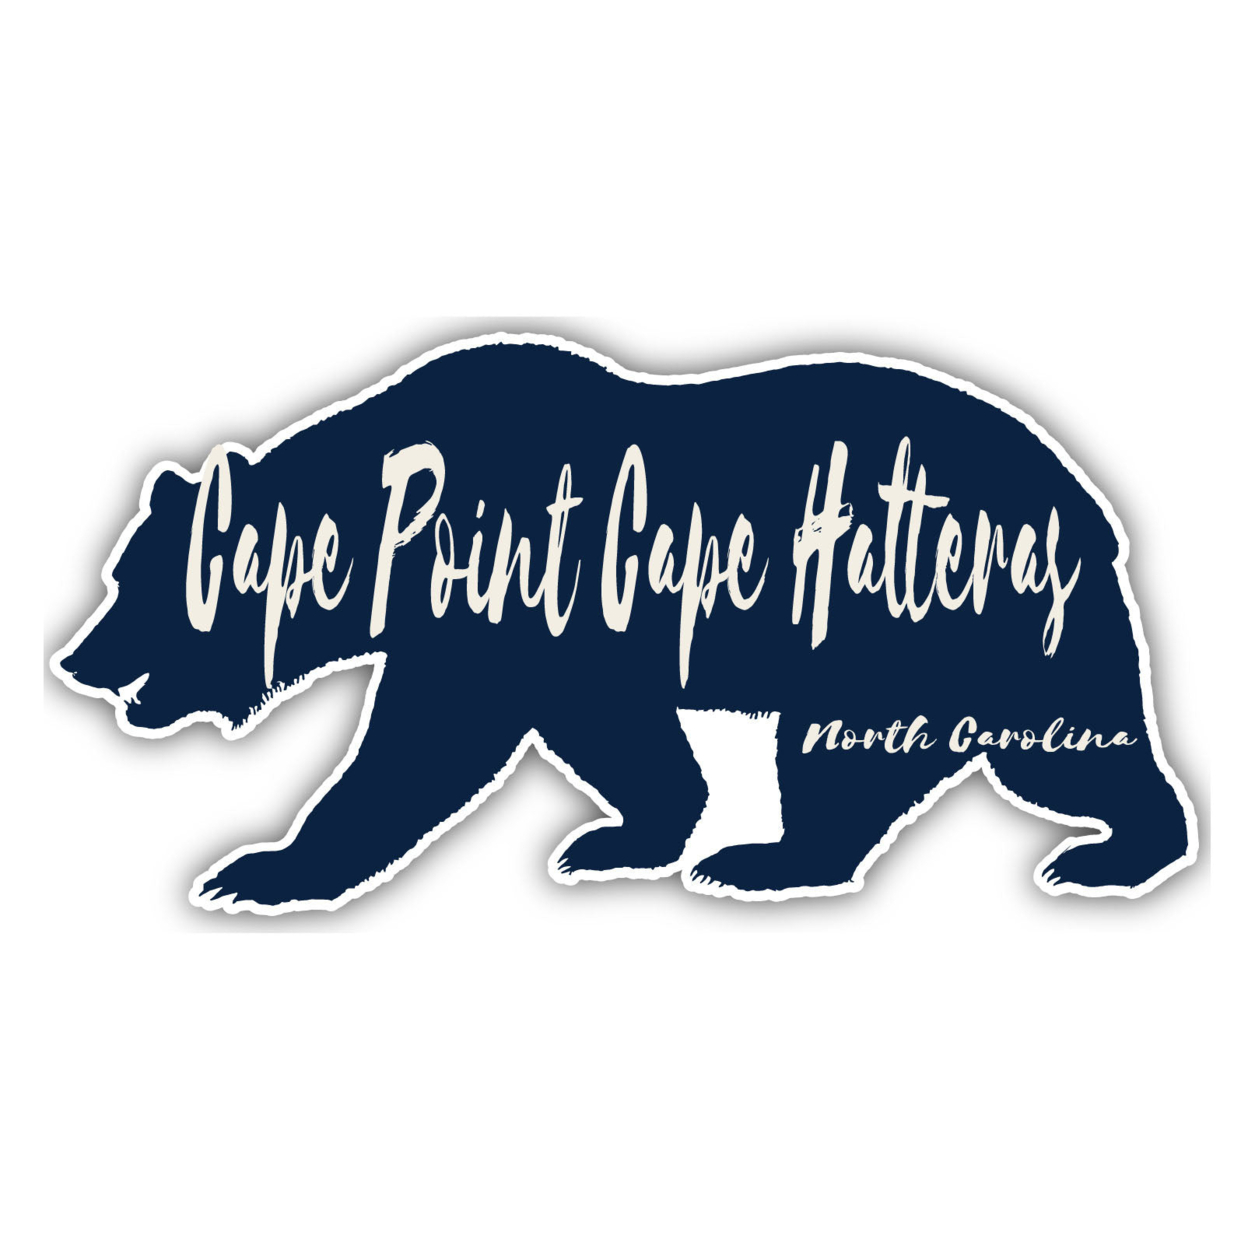 Cape Point Cape Hatteras North Carolina Souvenir Decorative Stickers (Choose Theme And Size) - 4-Pack, 8-Inch, Bear